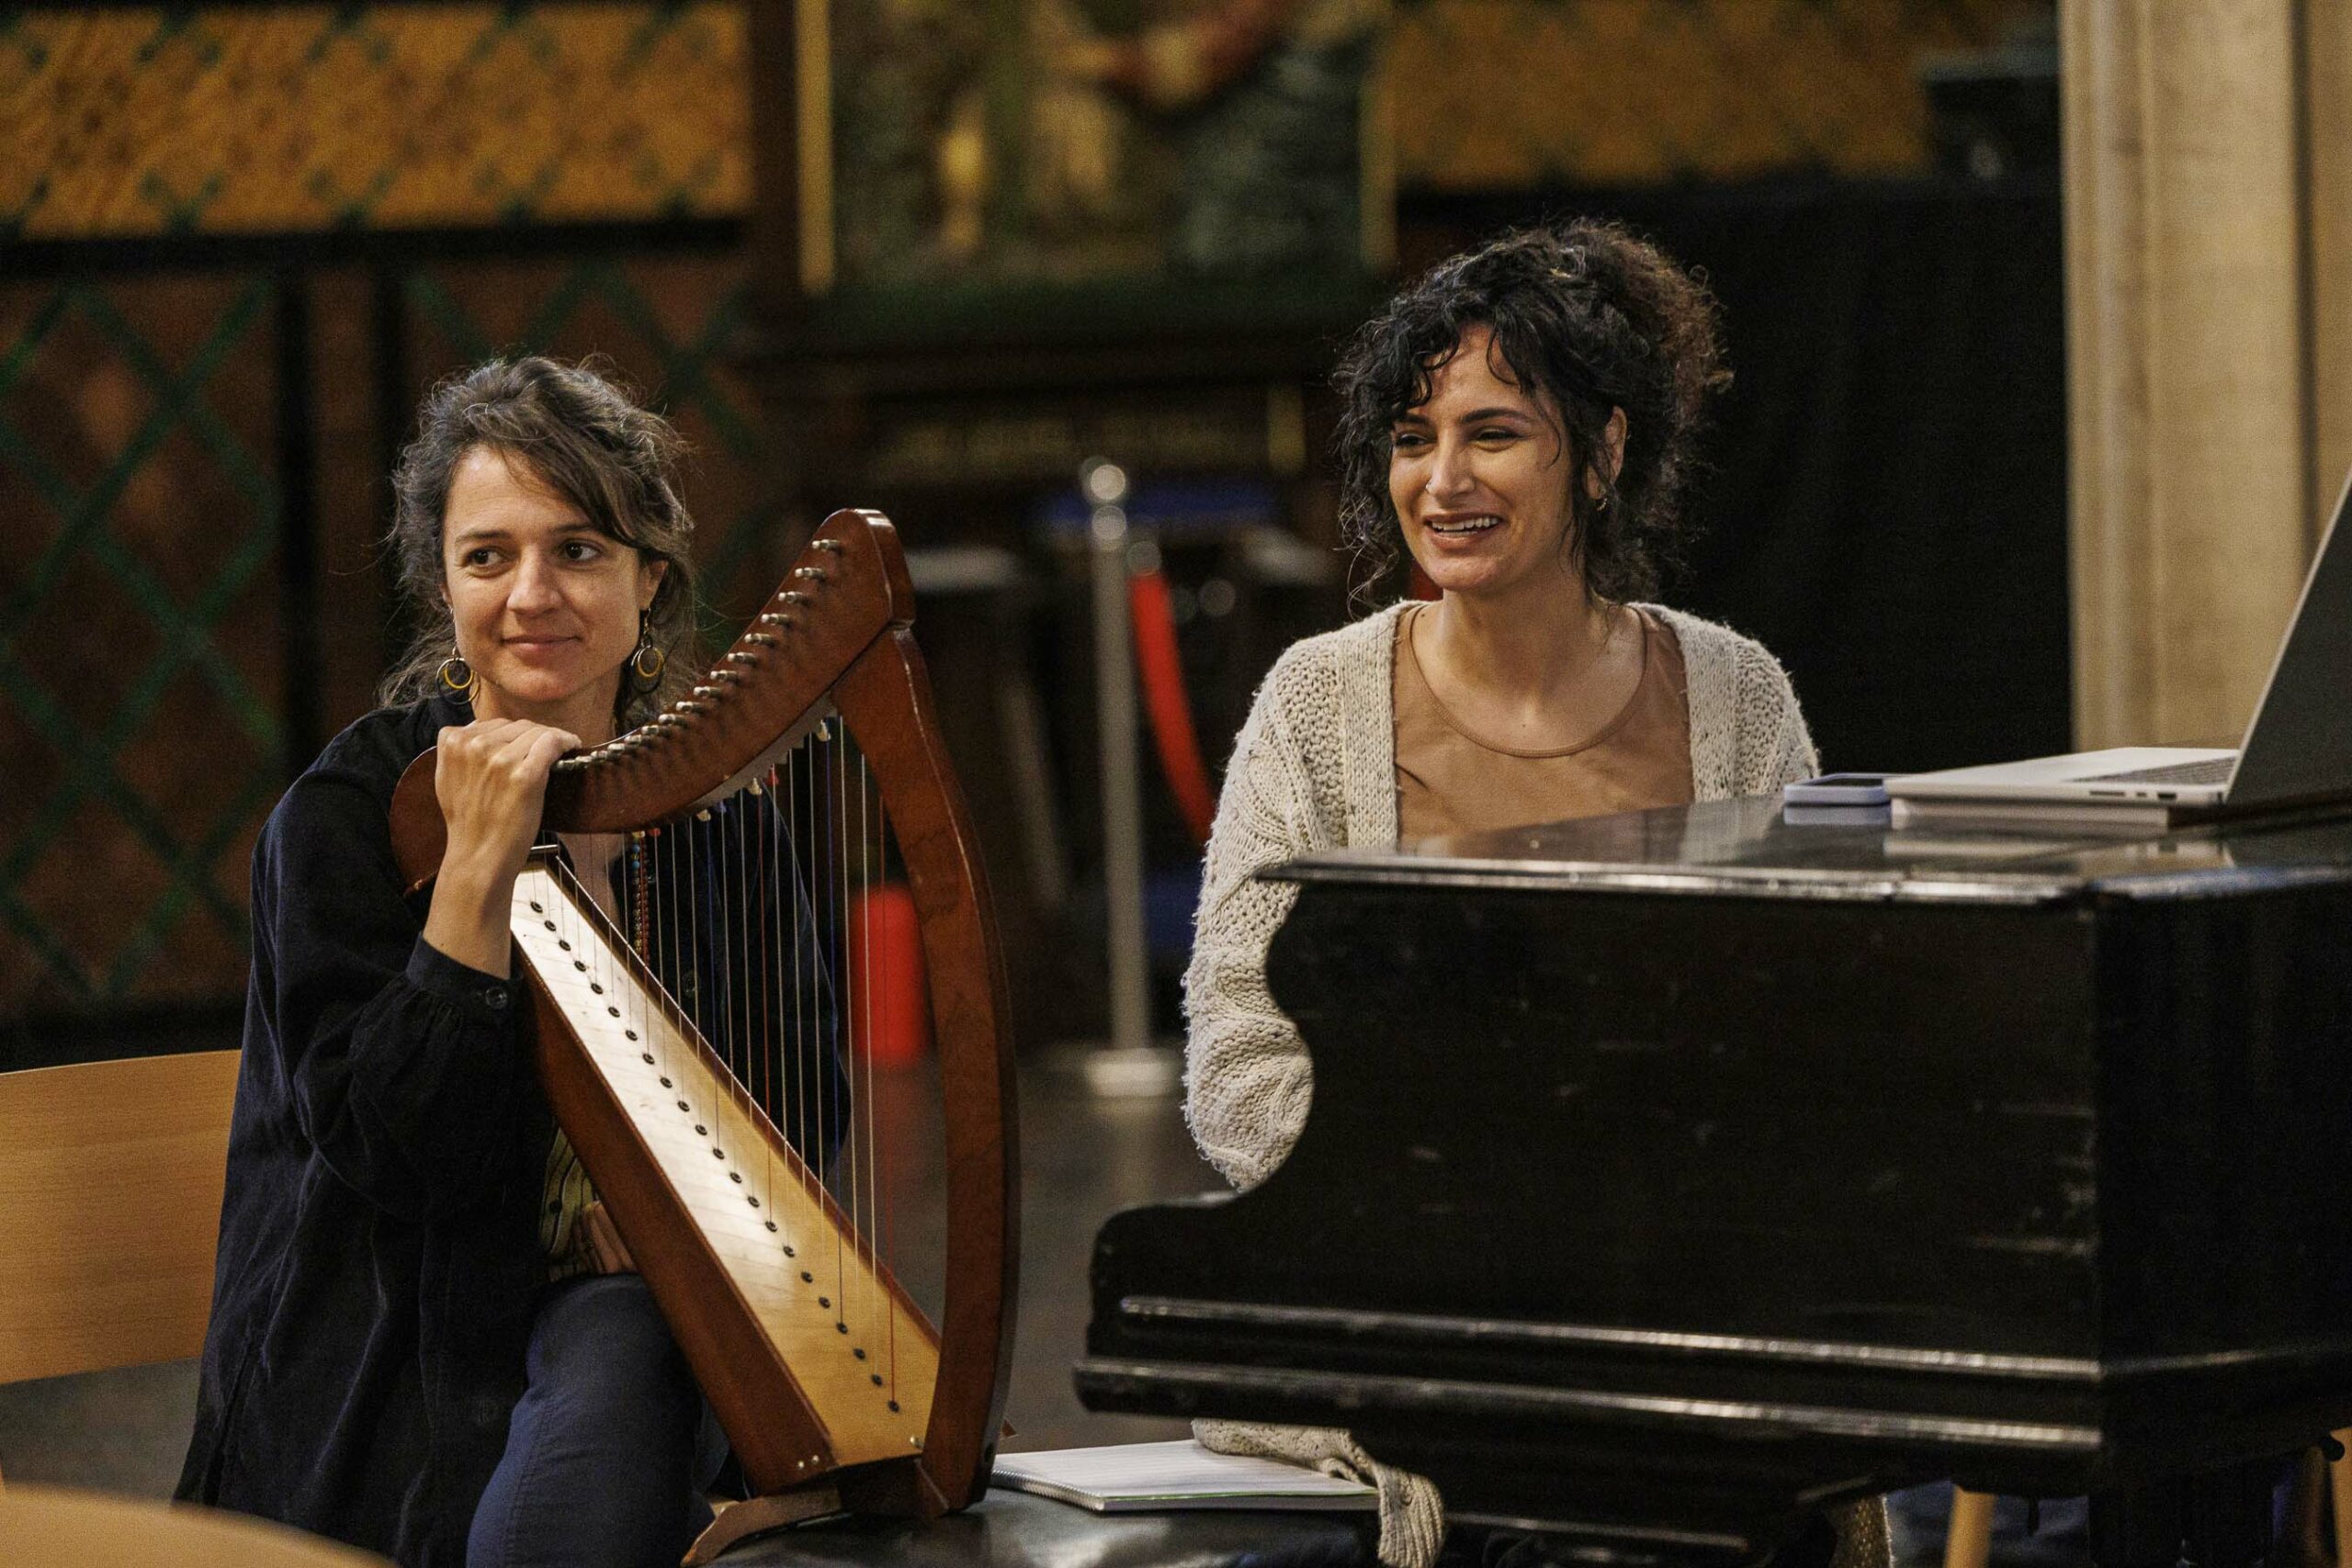 A woman sitting in front of piano and the other woman holding harp next to her